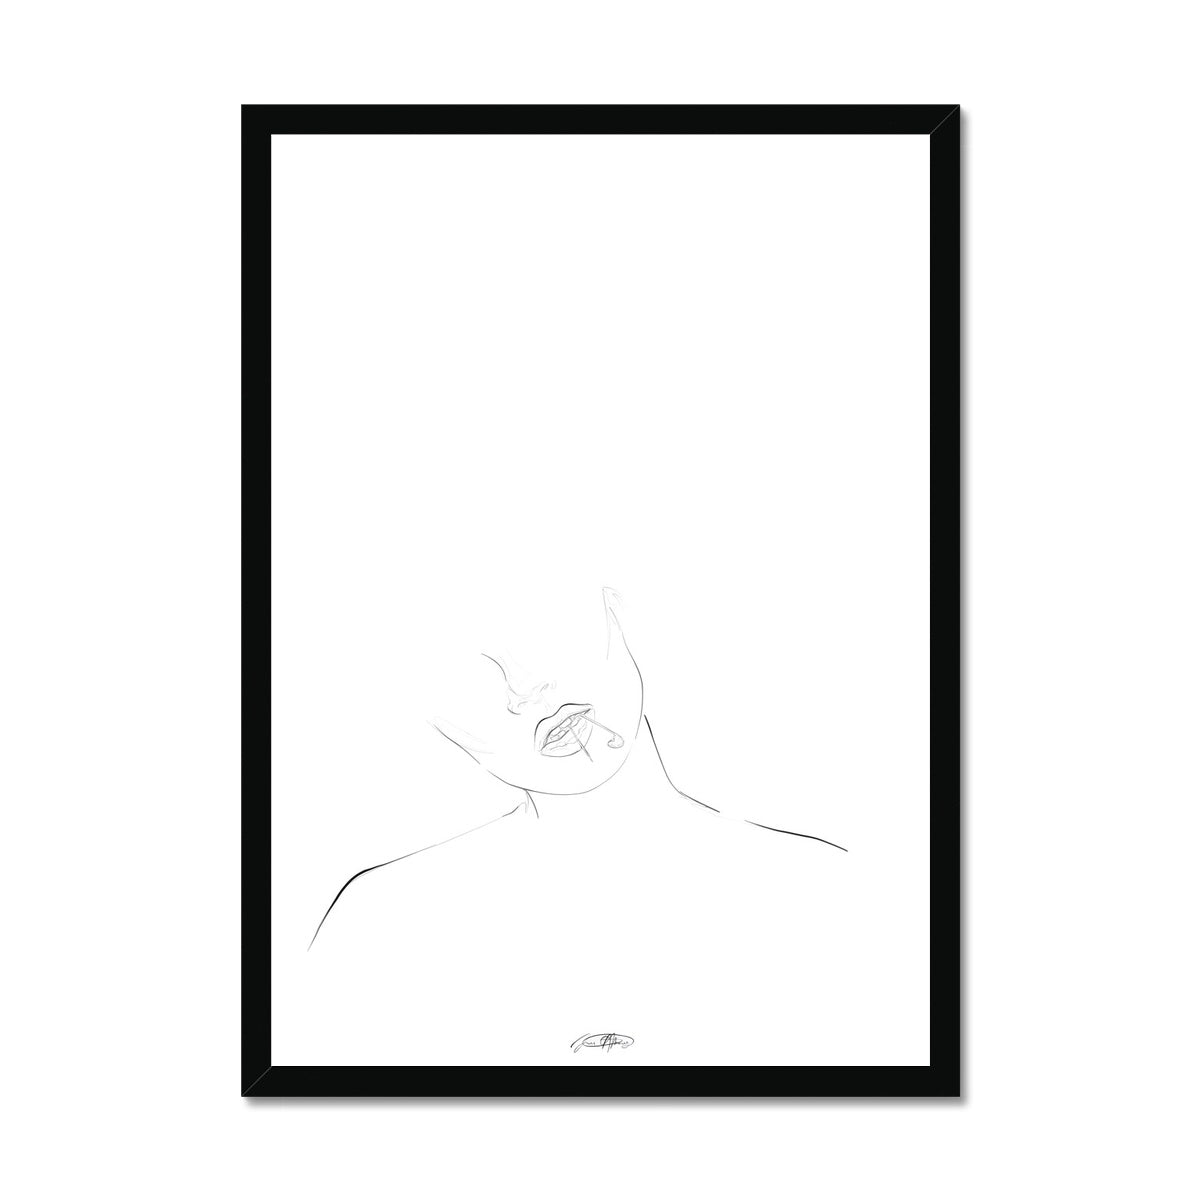 © les muses / Our line art collection of art prints features original line art drawings, delicately drawn,
of female figures and fashion photography. Simple feminine line art posters perfect for those
looking for visually stunning original artwork with beautiful intricate detail.